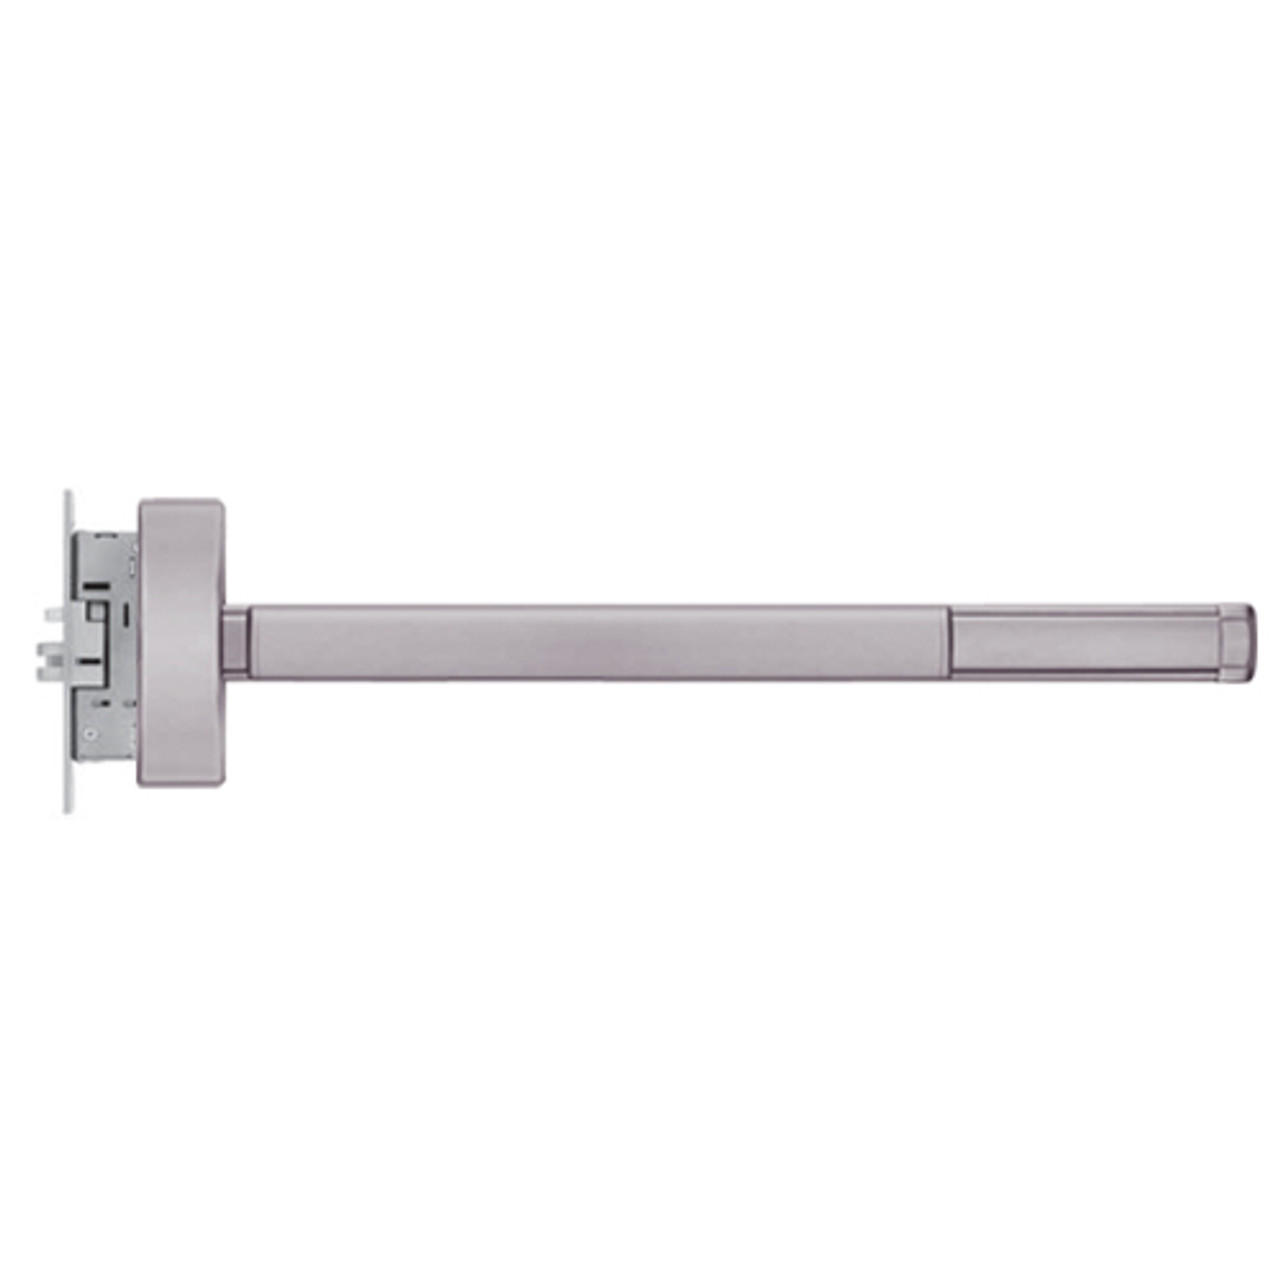 TS2315-LHR-630-36 PHI 2300 Series Apex Mortise Exit Device with Touchbar Monitoring Switch Prepped for Thumb Piece Always Active in Satin Stainless Steel Finish